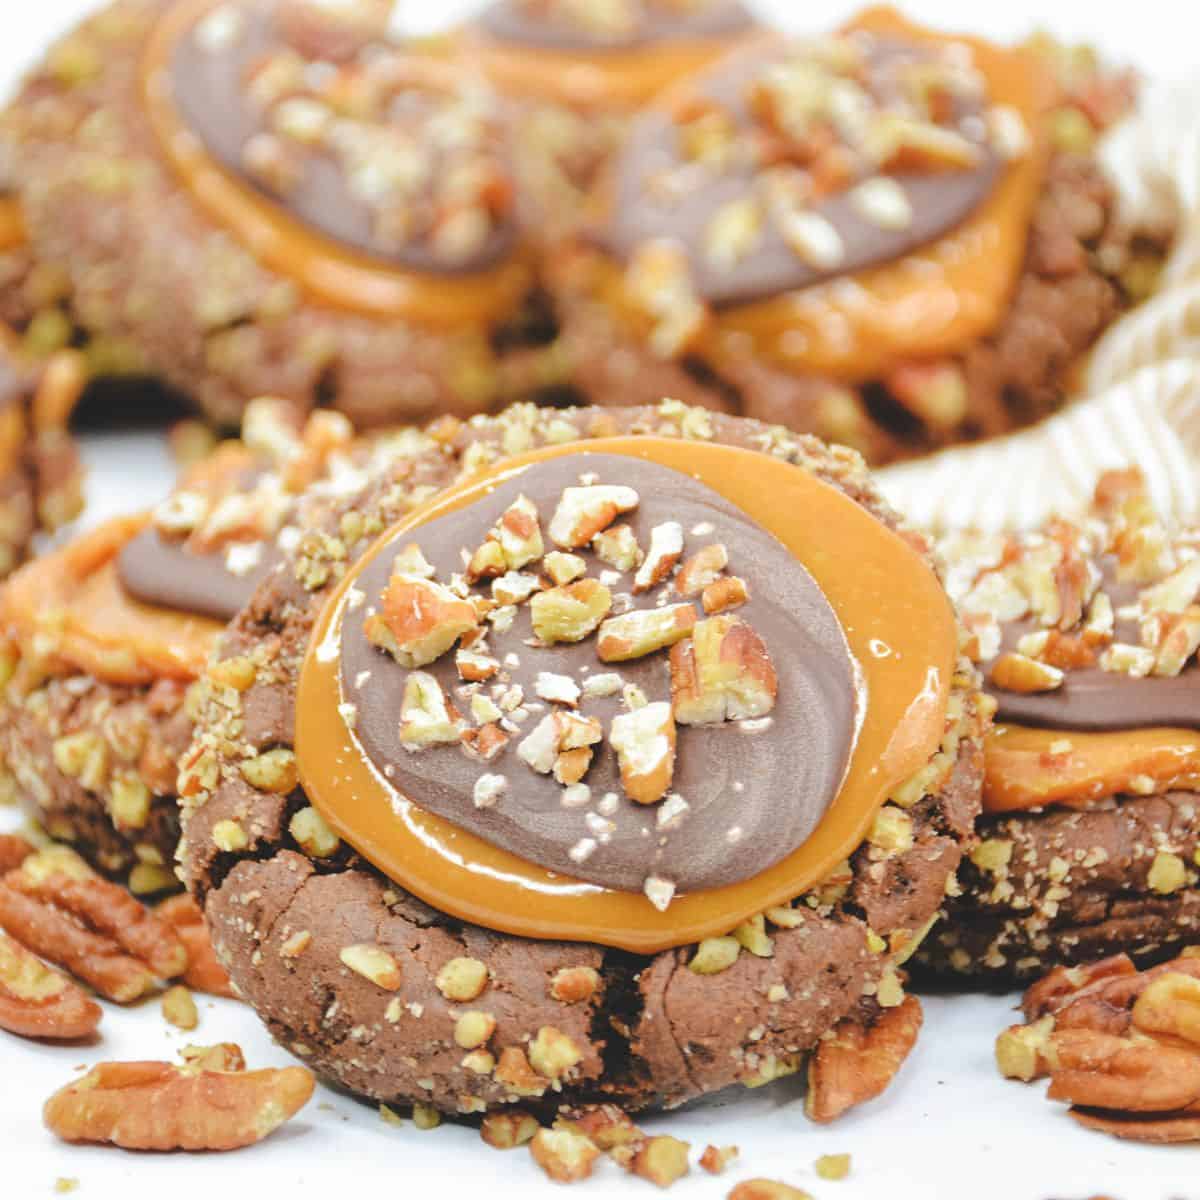 Copycat crumbl turtle cookies with nuts and a caramel center.